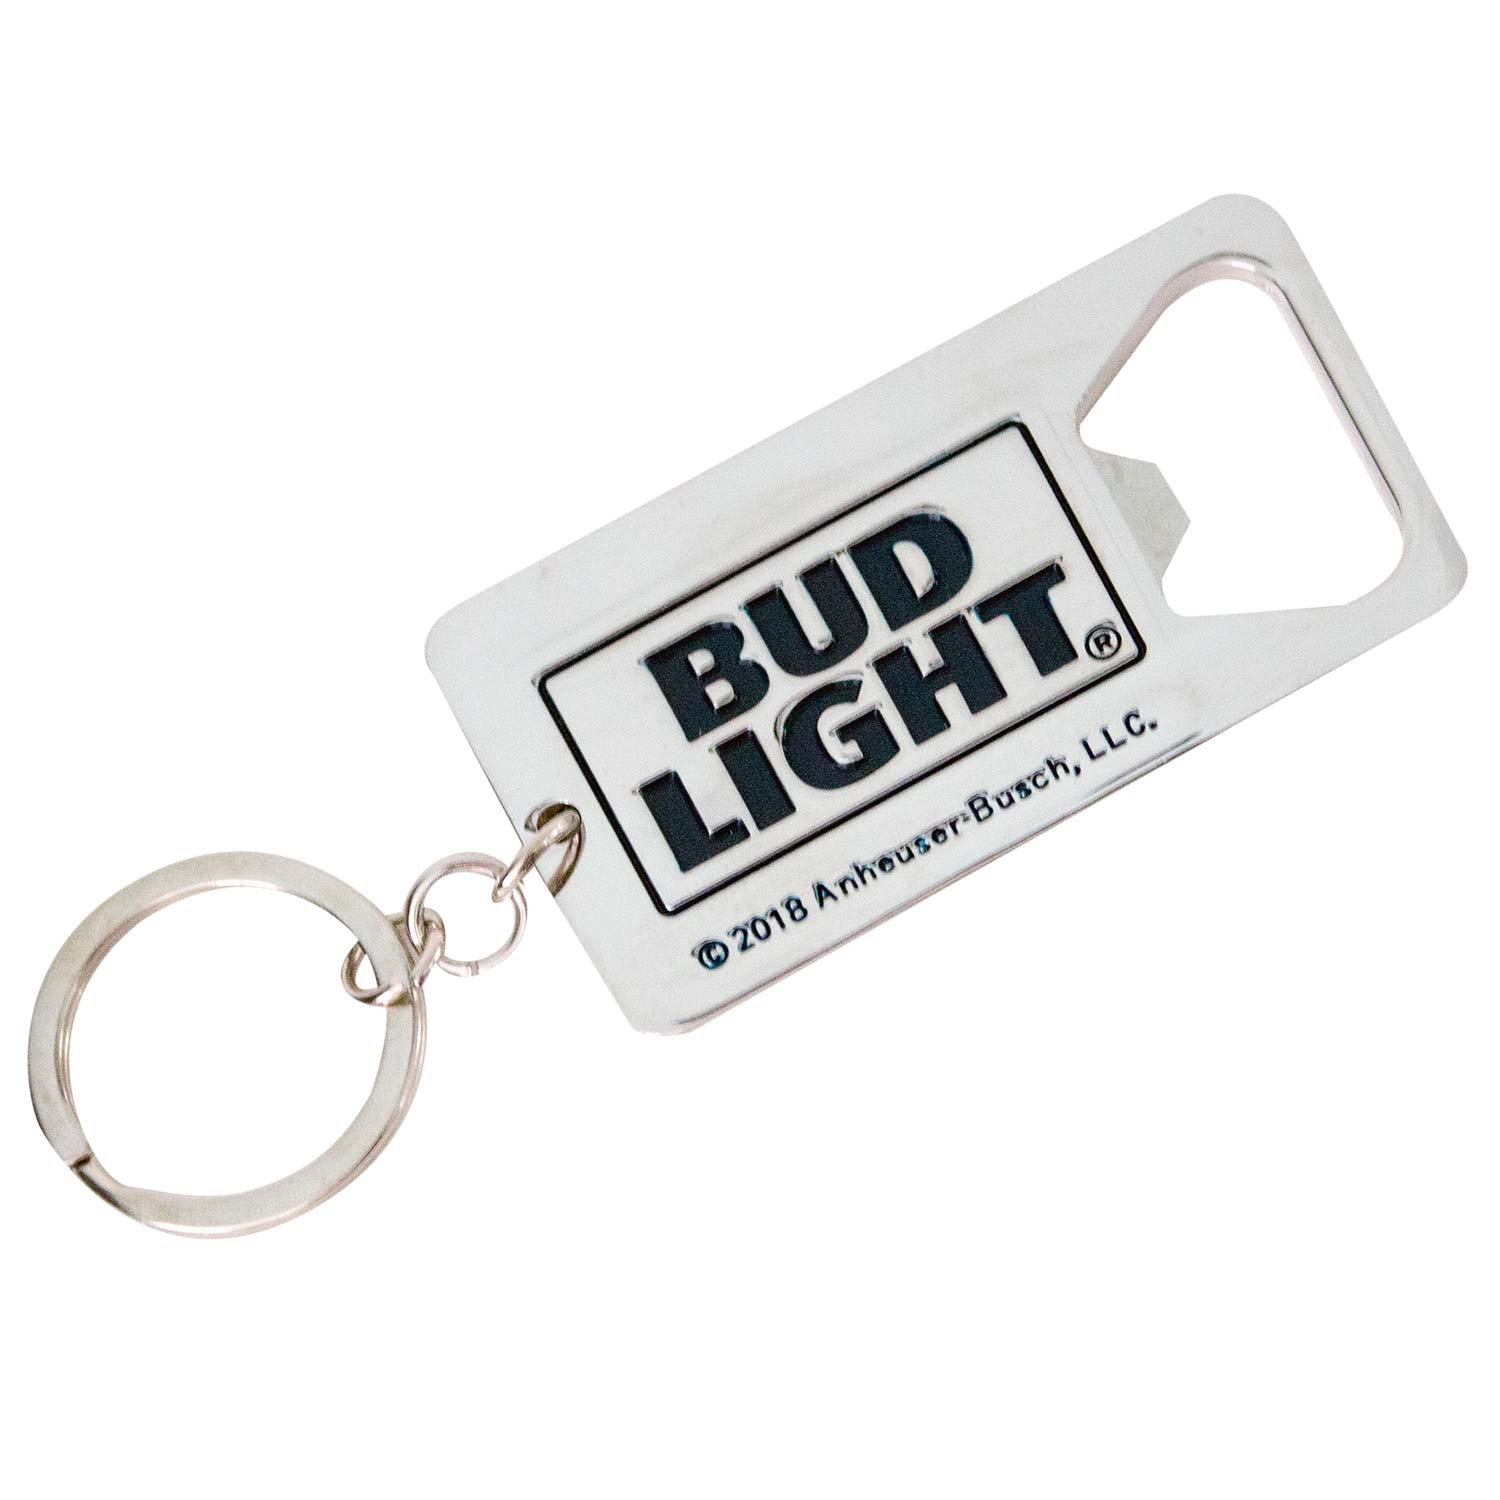 New in Sealed Pkg Silver Tone Metal Newcastle Beer Bottle Opener and Key Chain 